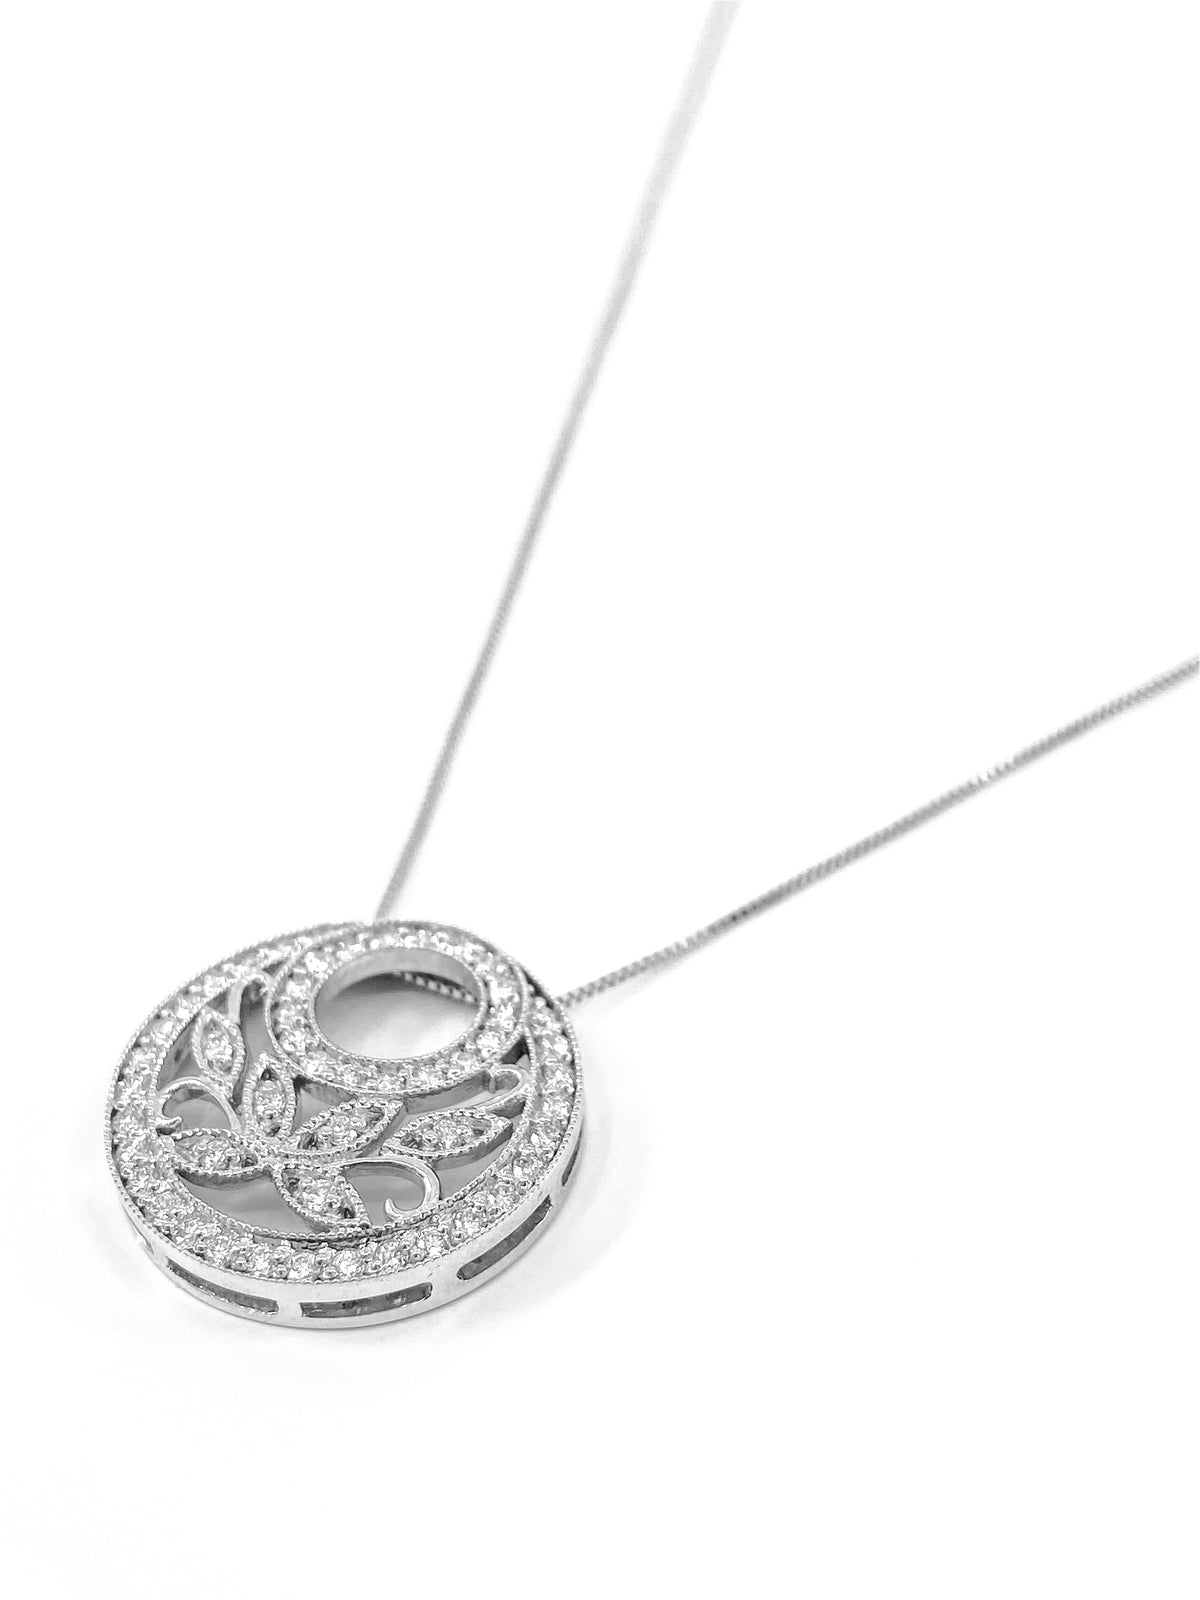 10K White Gold 0.50cttw Diamond Pendant with Box Chain - 18 Inches